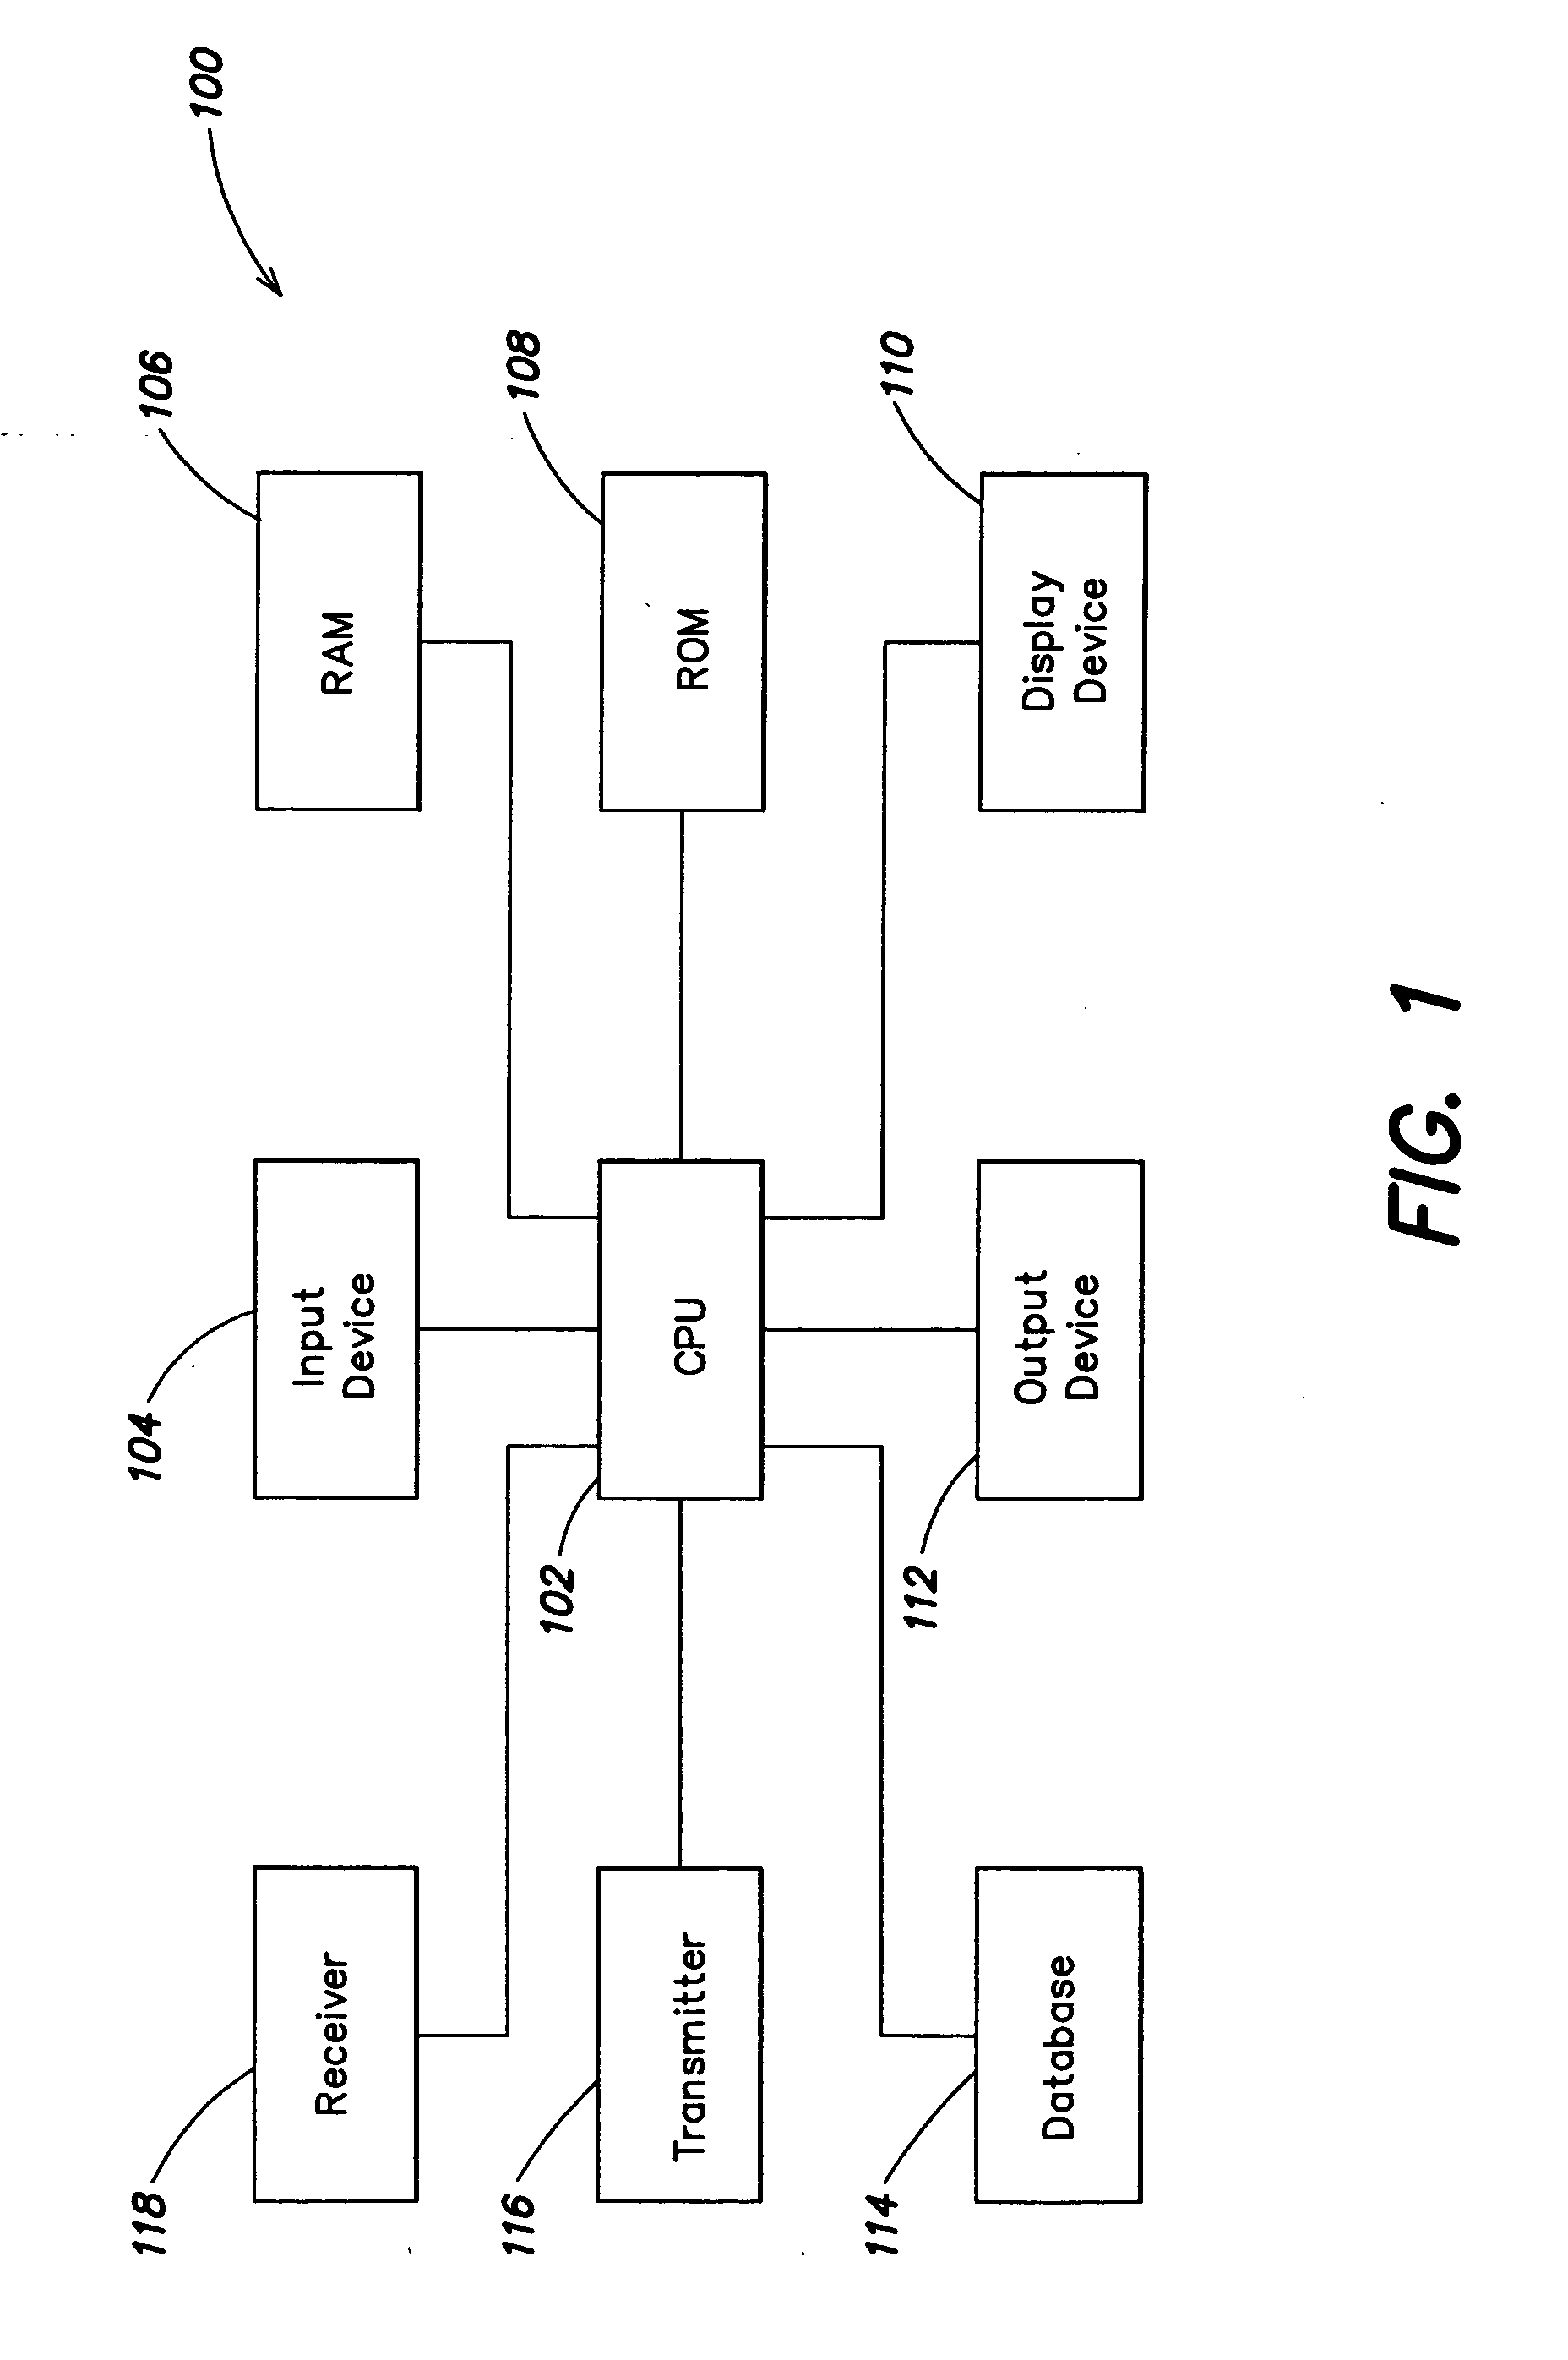 Apparatus and methods for predicting and/or calibrating memory yields